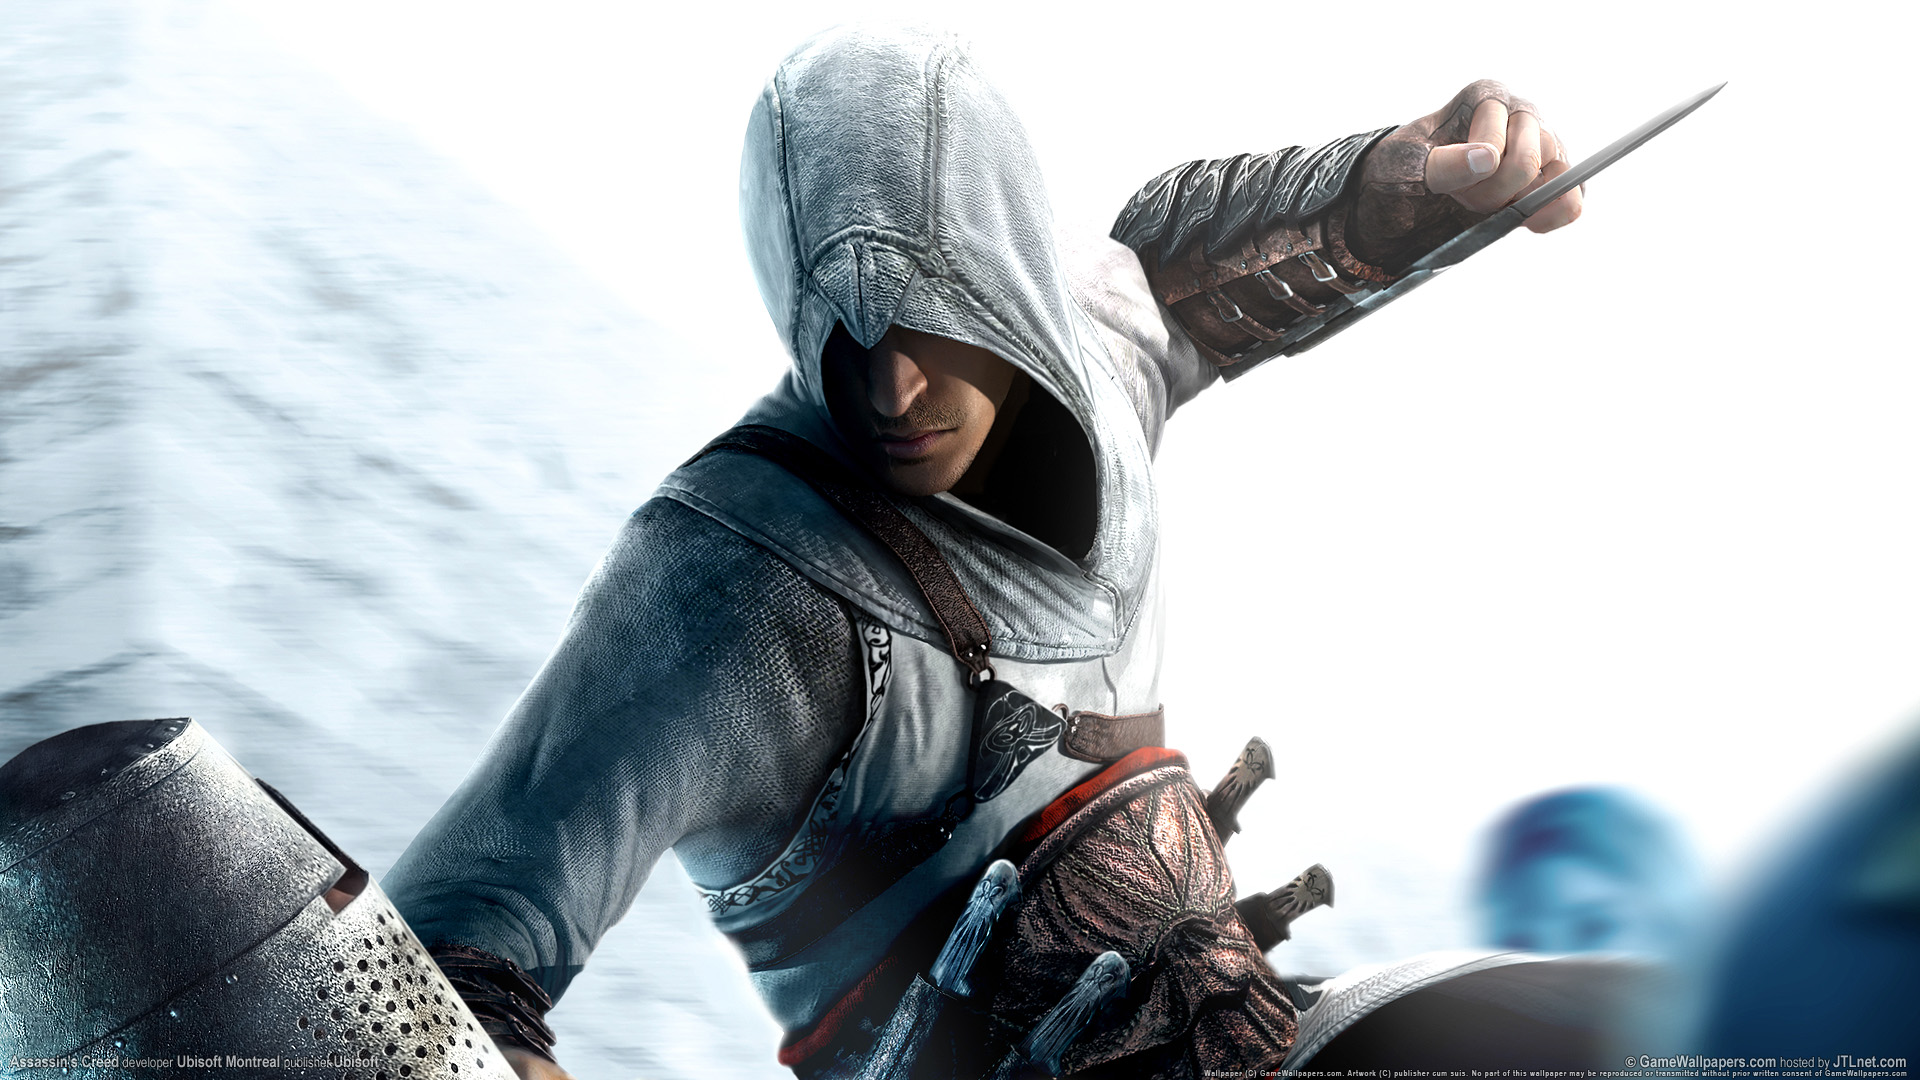 assassin creed hd wallpapers 1080p,cool,games,photography,pc game,screenshot